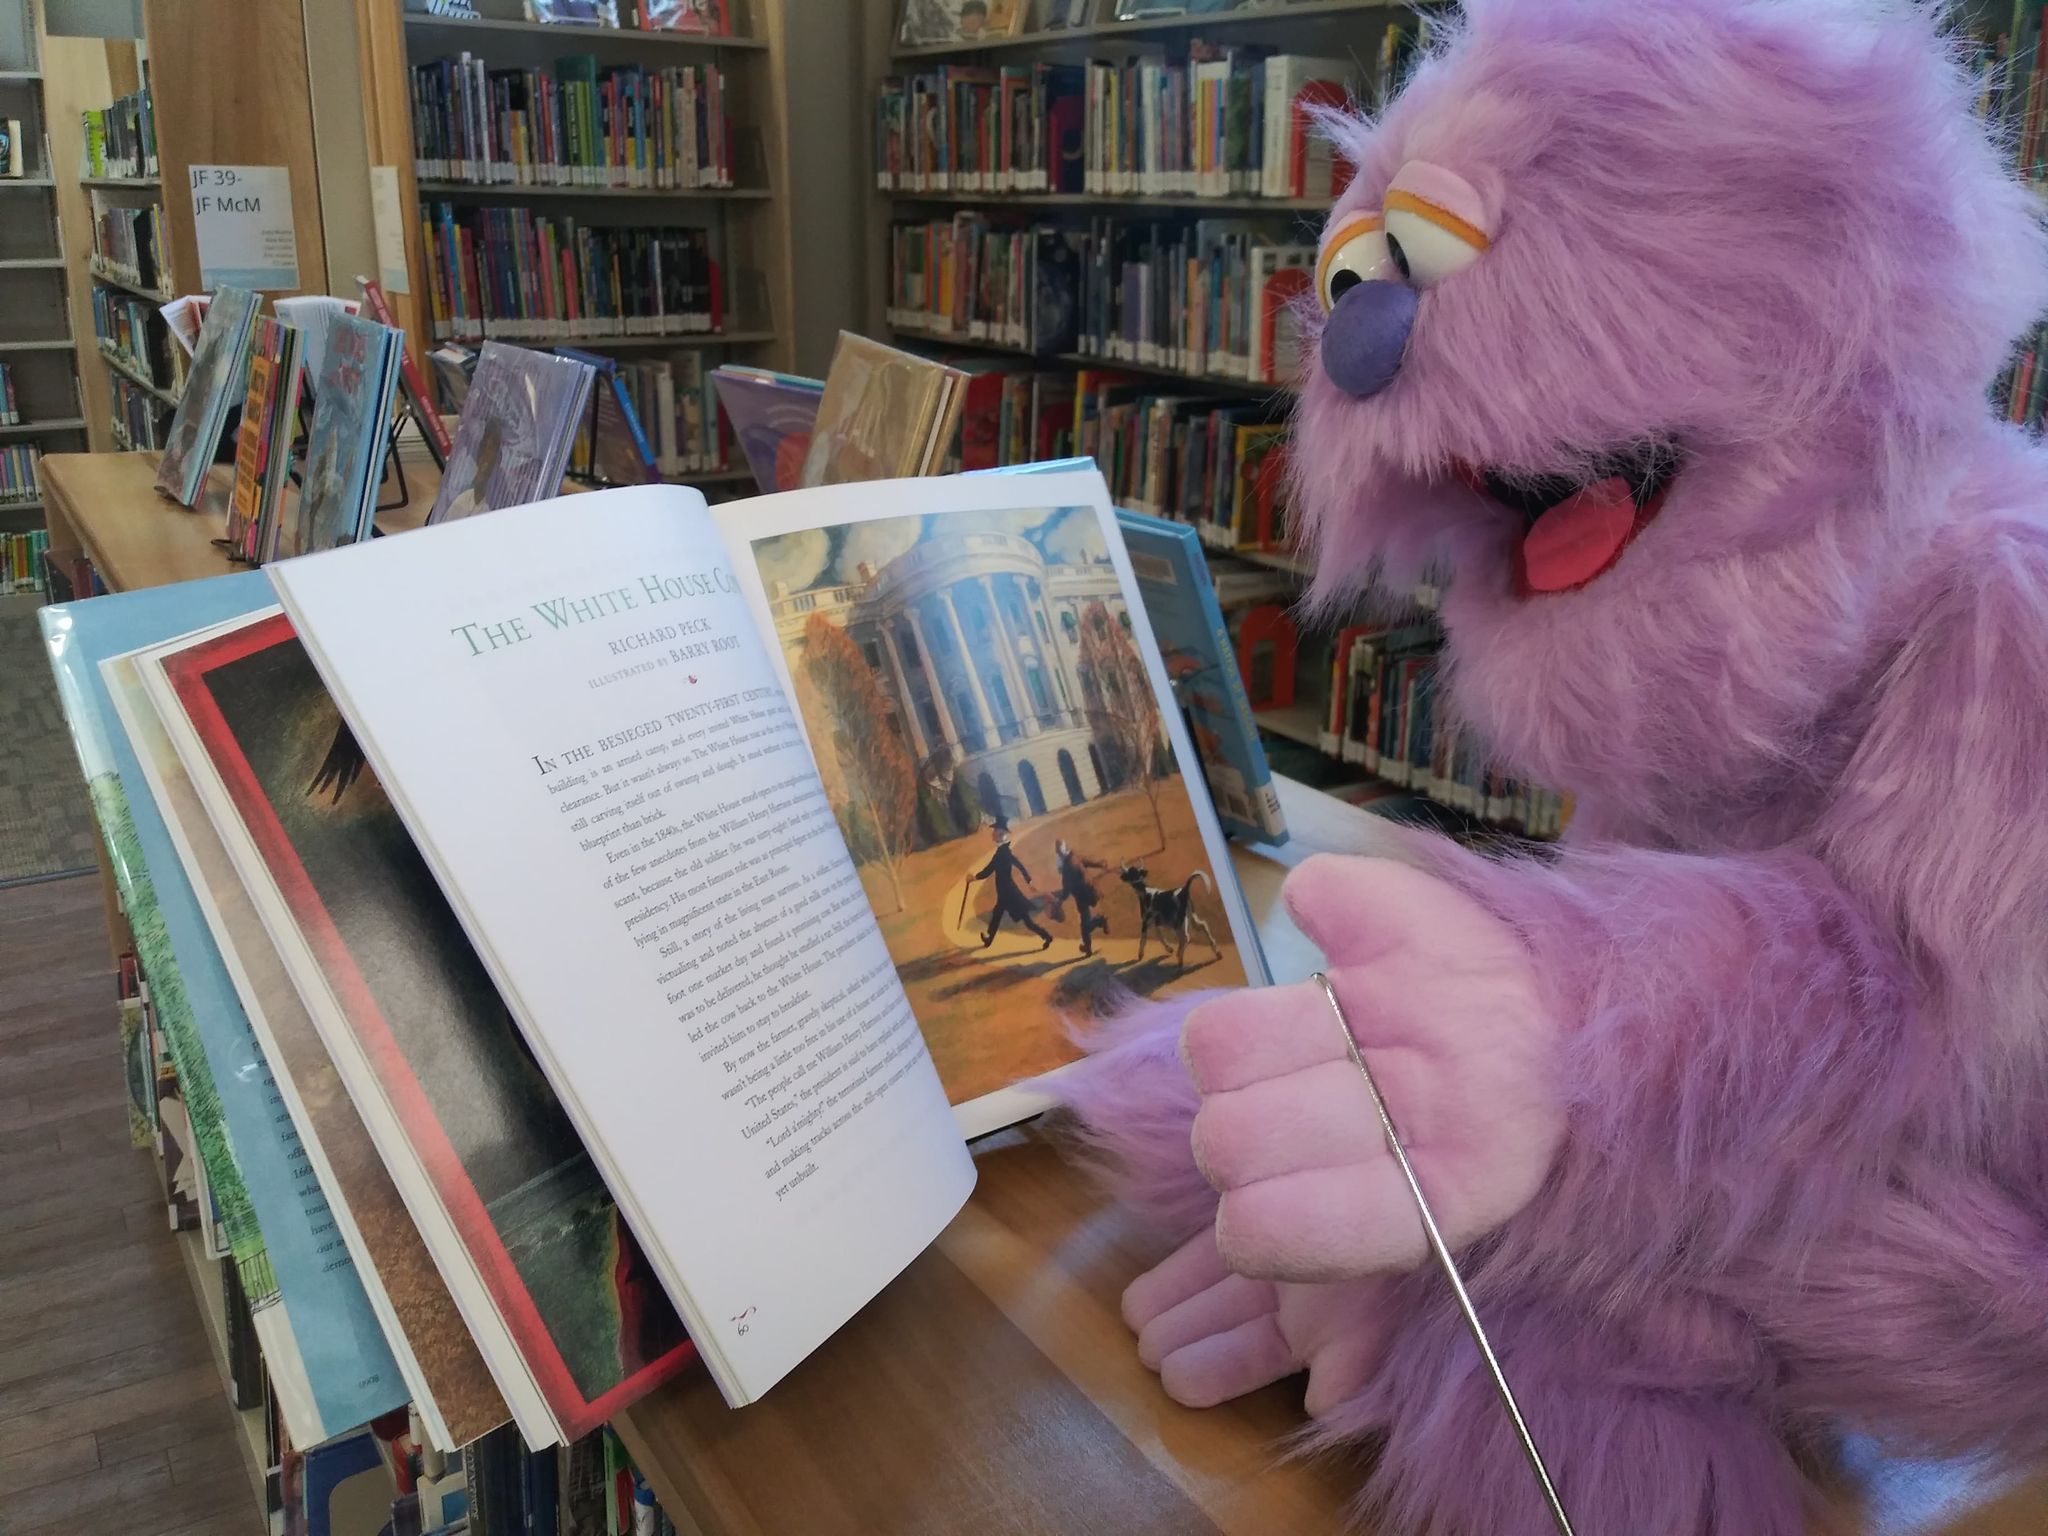 Marvin the story monster reading a book